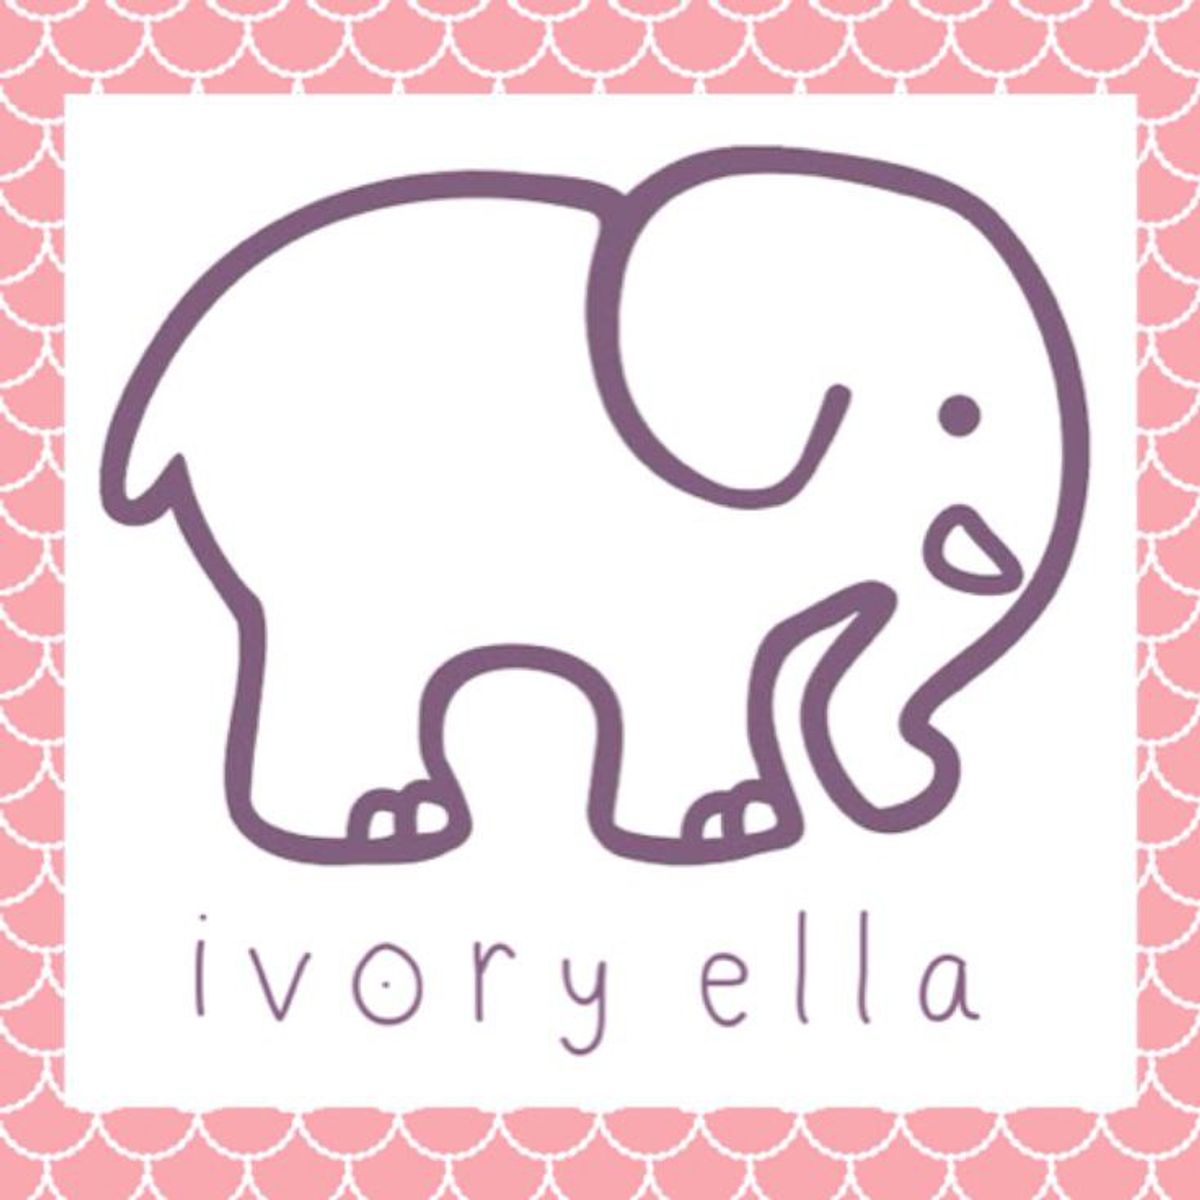 Why You Should Be Spending Your Money On Ivory Ella